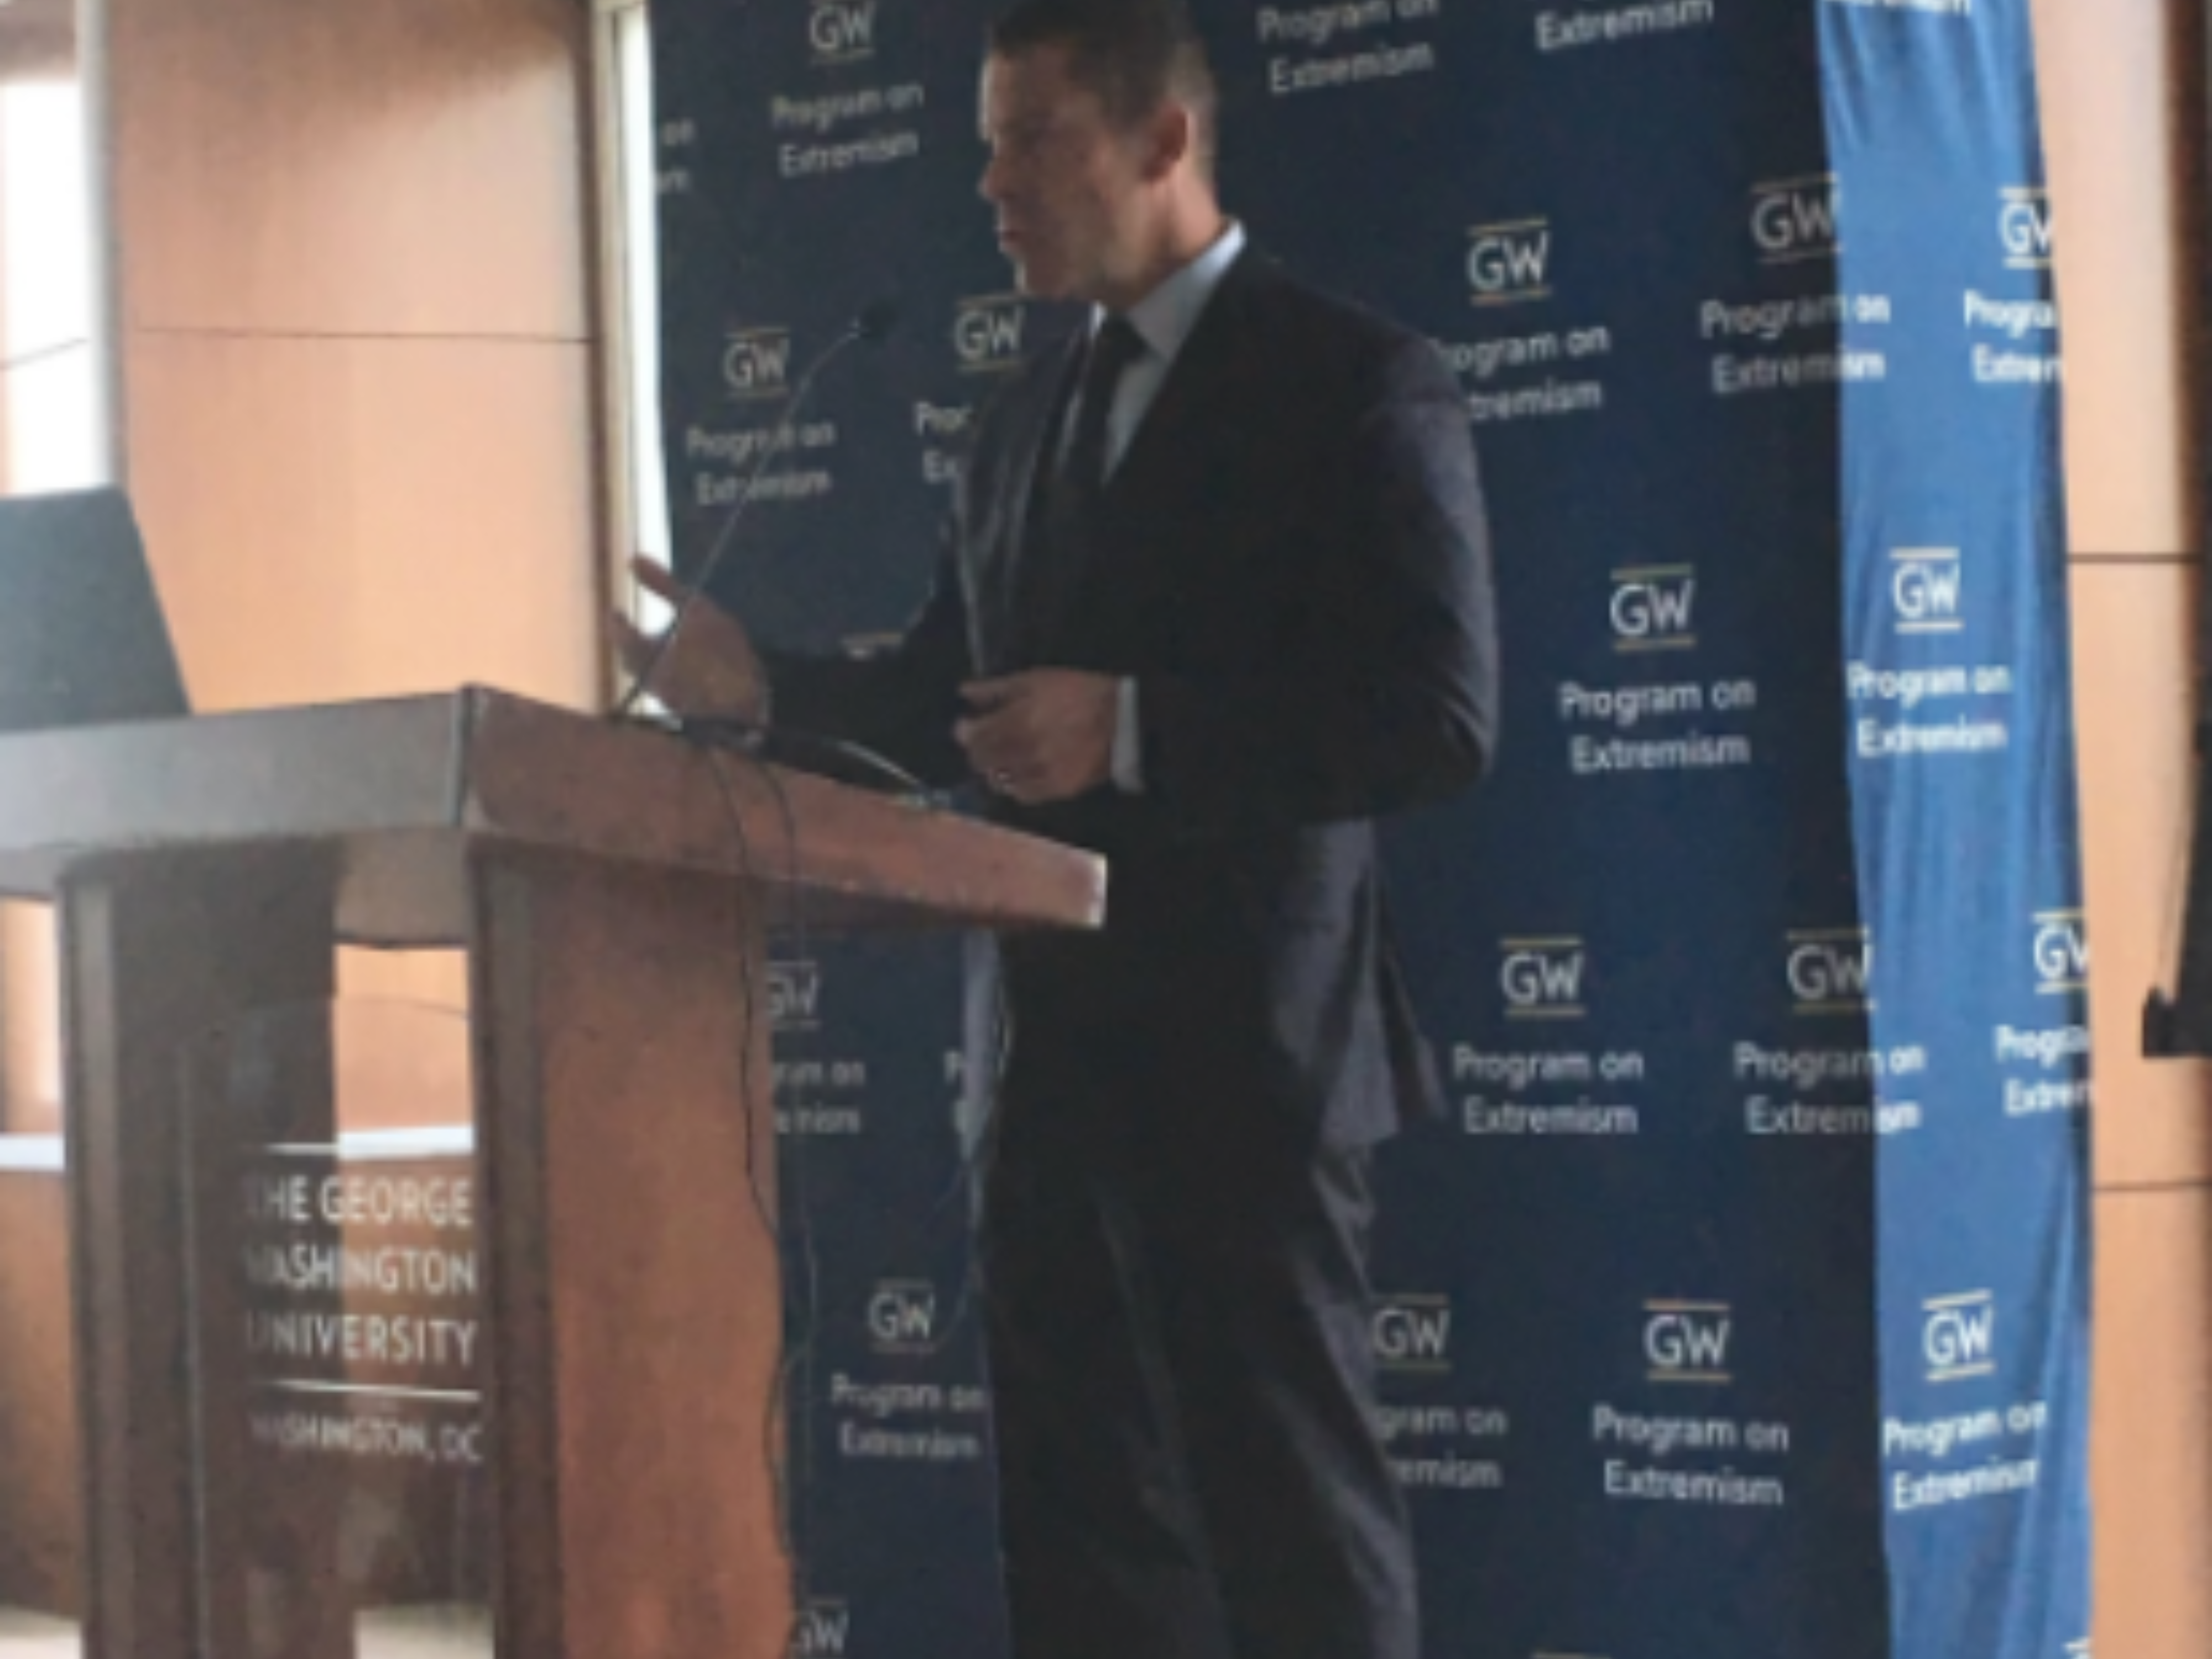 An image of Thomas E. Brzozowski, Counsel for Domestic Terrorism at the U.S. Department of Justice, delivering remarks.